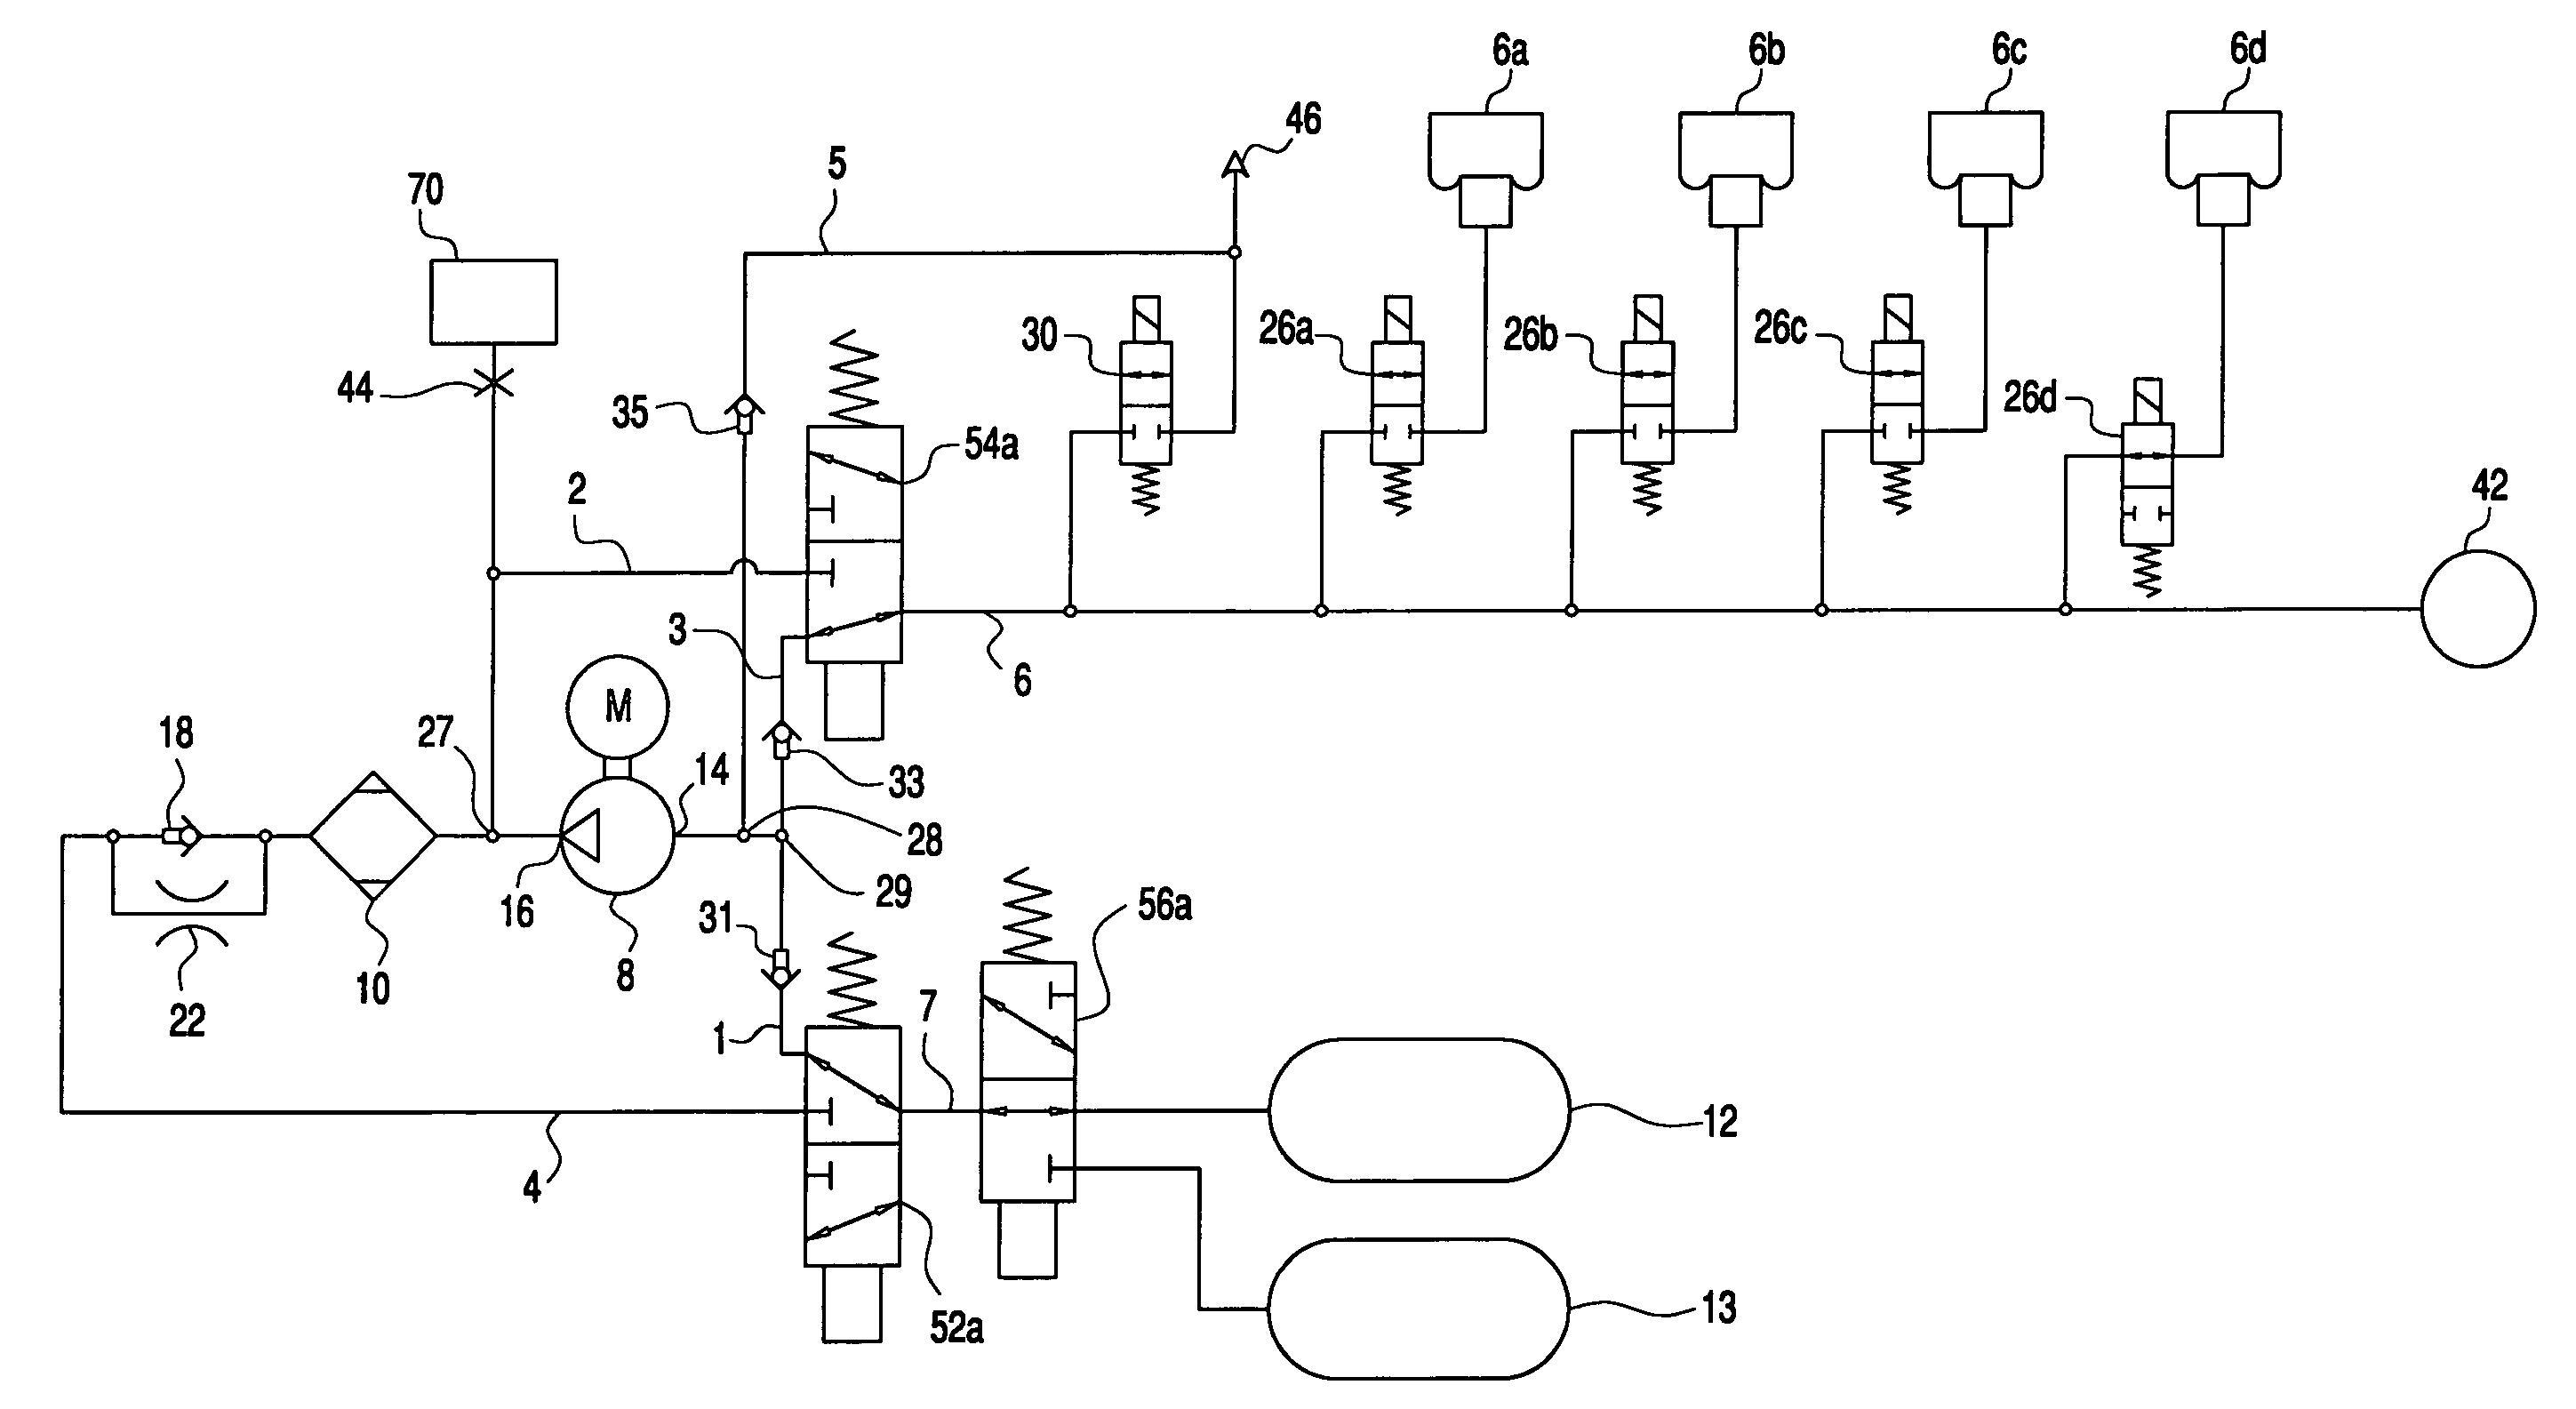 Closed level control system for a vehicle with the system having two pressure stores